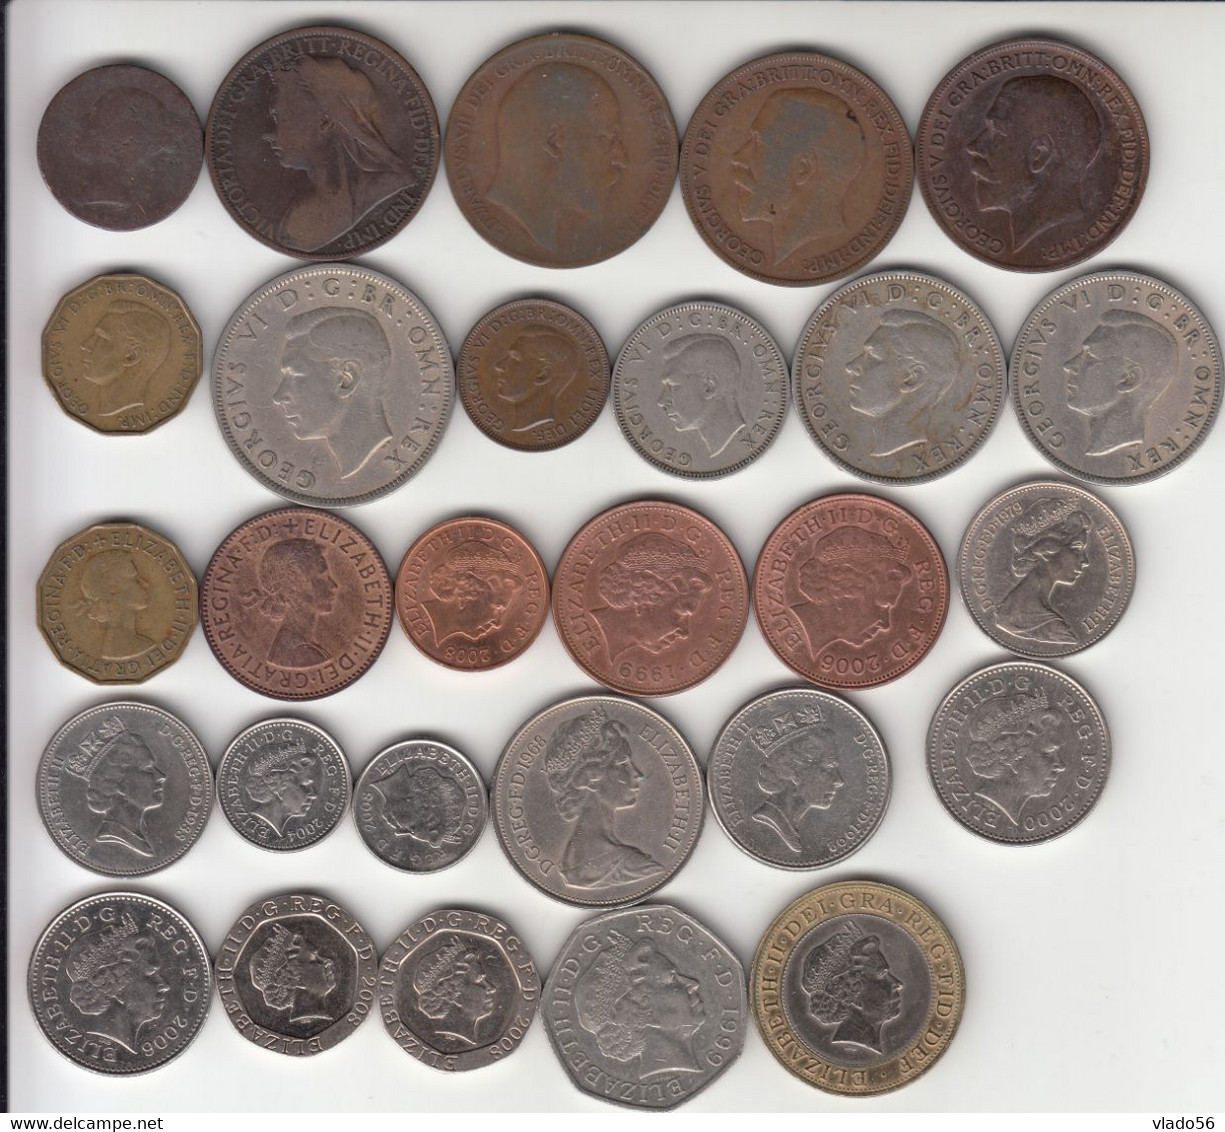 GREAT BRITAIN  - LOT 27 DIFFERENT COINS FROM  1 FARTHING 1847 UP TO  2 POUNDS 2008 ,  LM1.23 - Colecciones